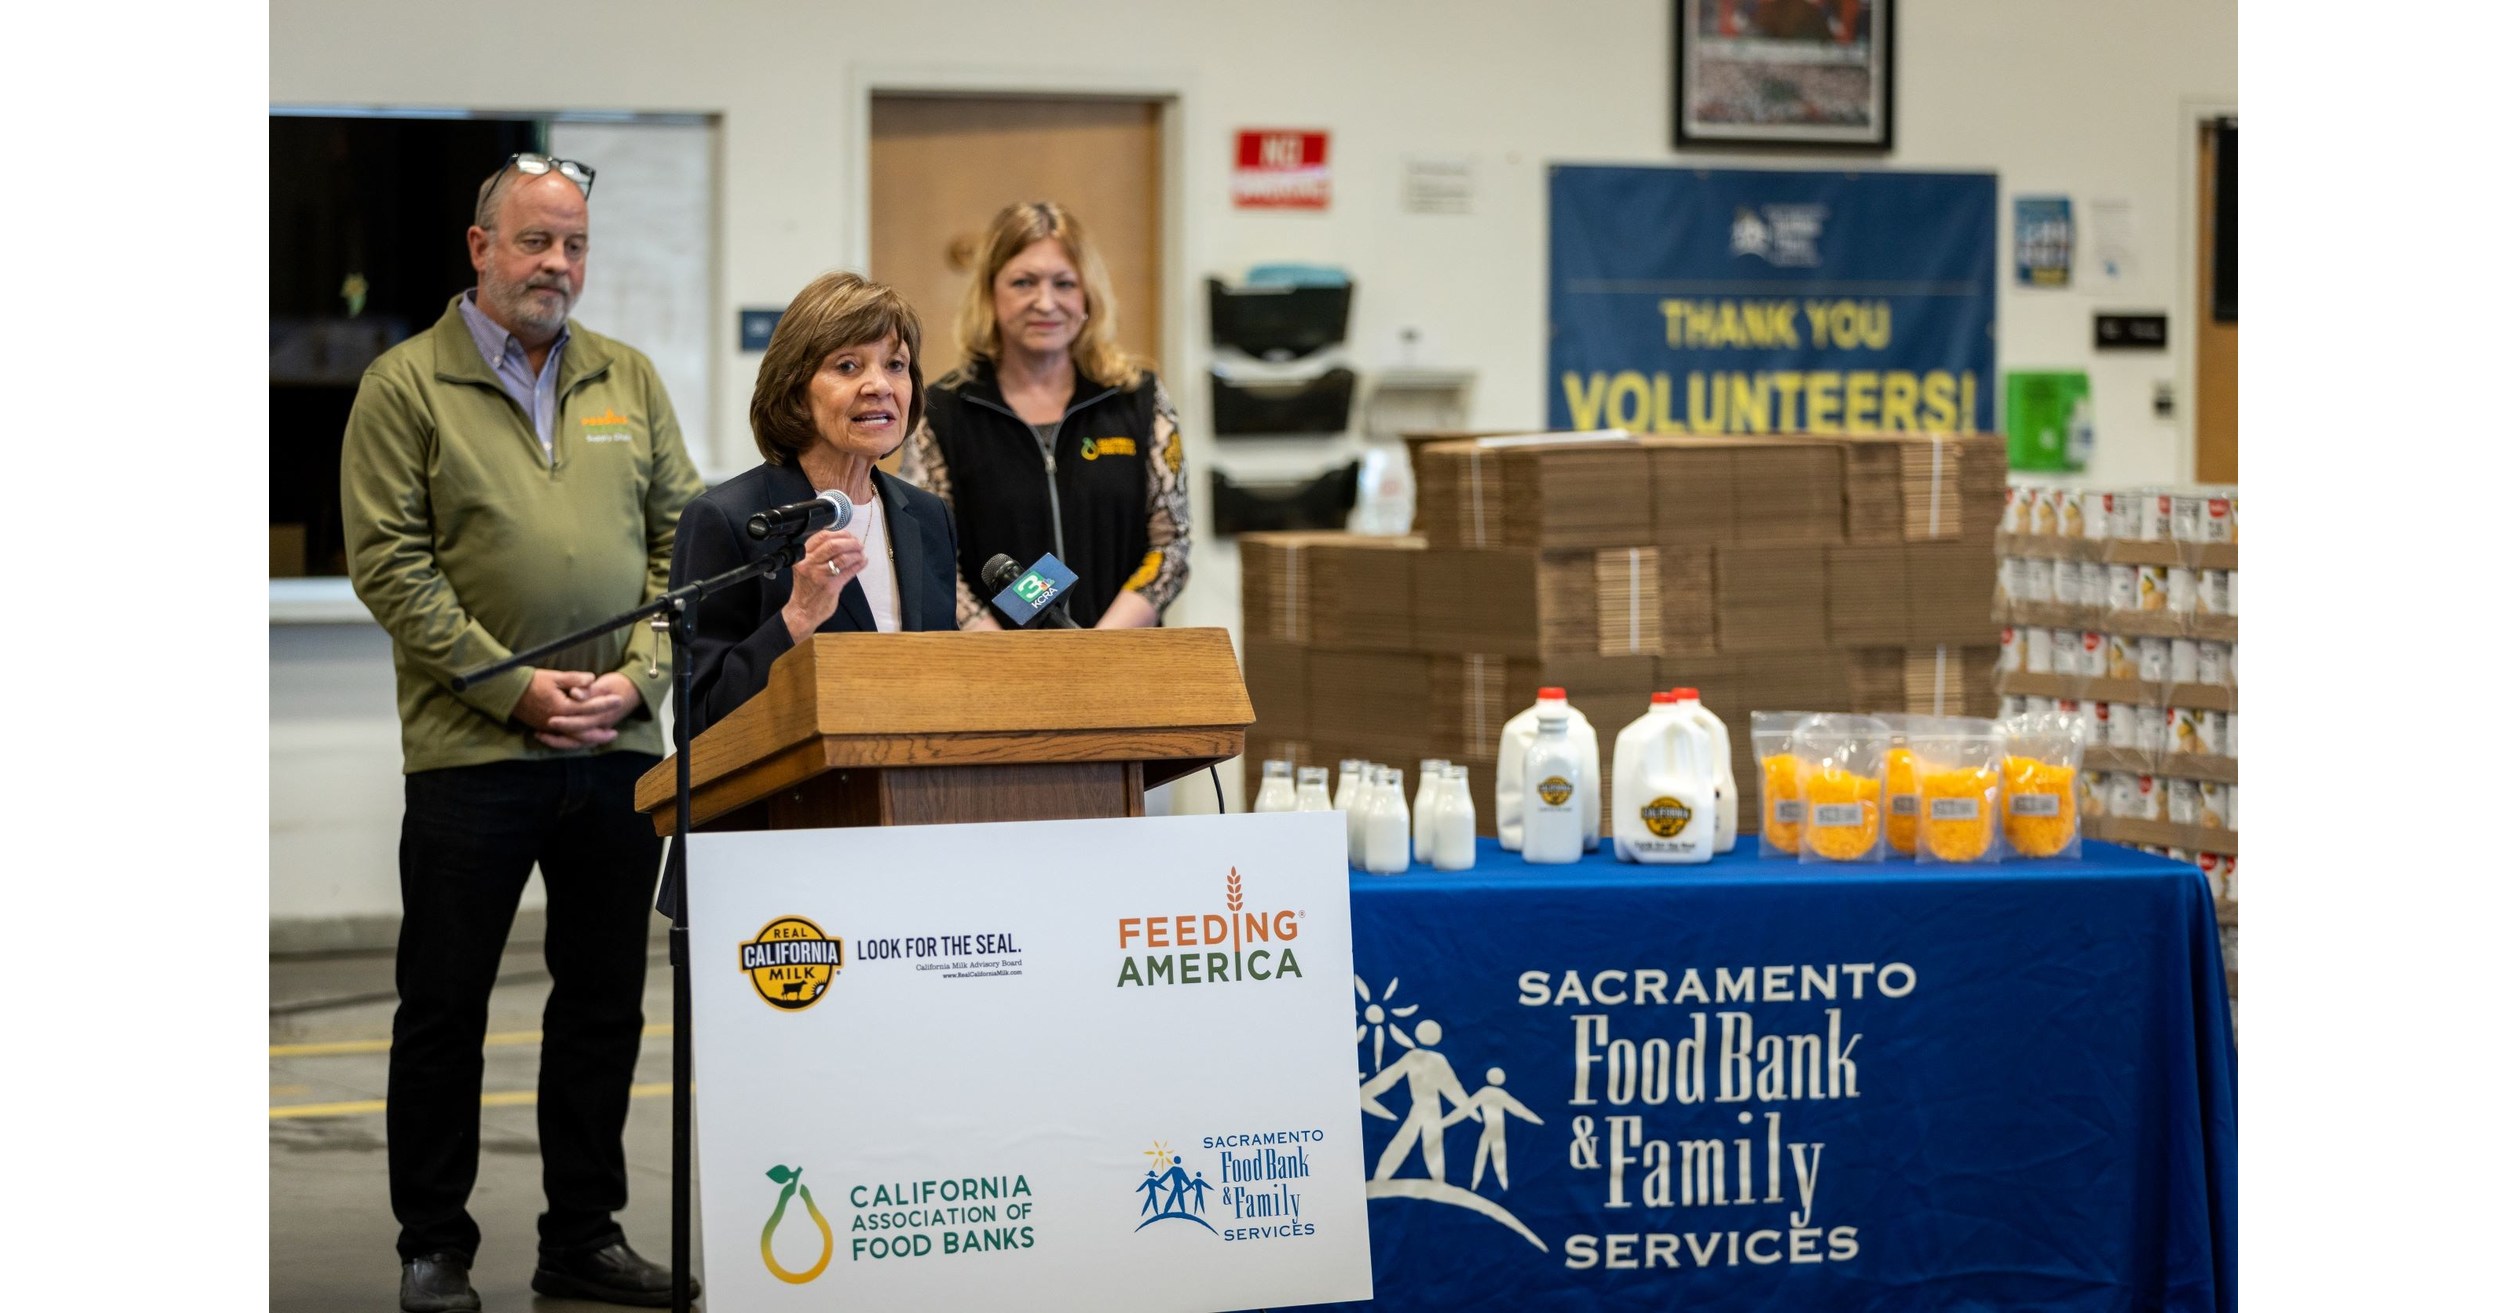 California Dairy Families Partner with Feeding America and the California Association of Food Banks to Shred Hunger with Pilot Project Delivering More Than 190,000 Pounds of Cheese to Feeding Programs Throughout the State